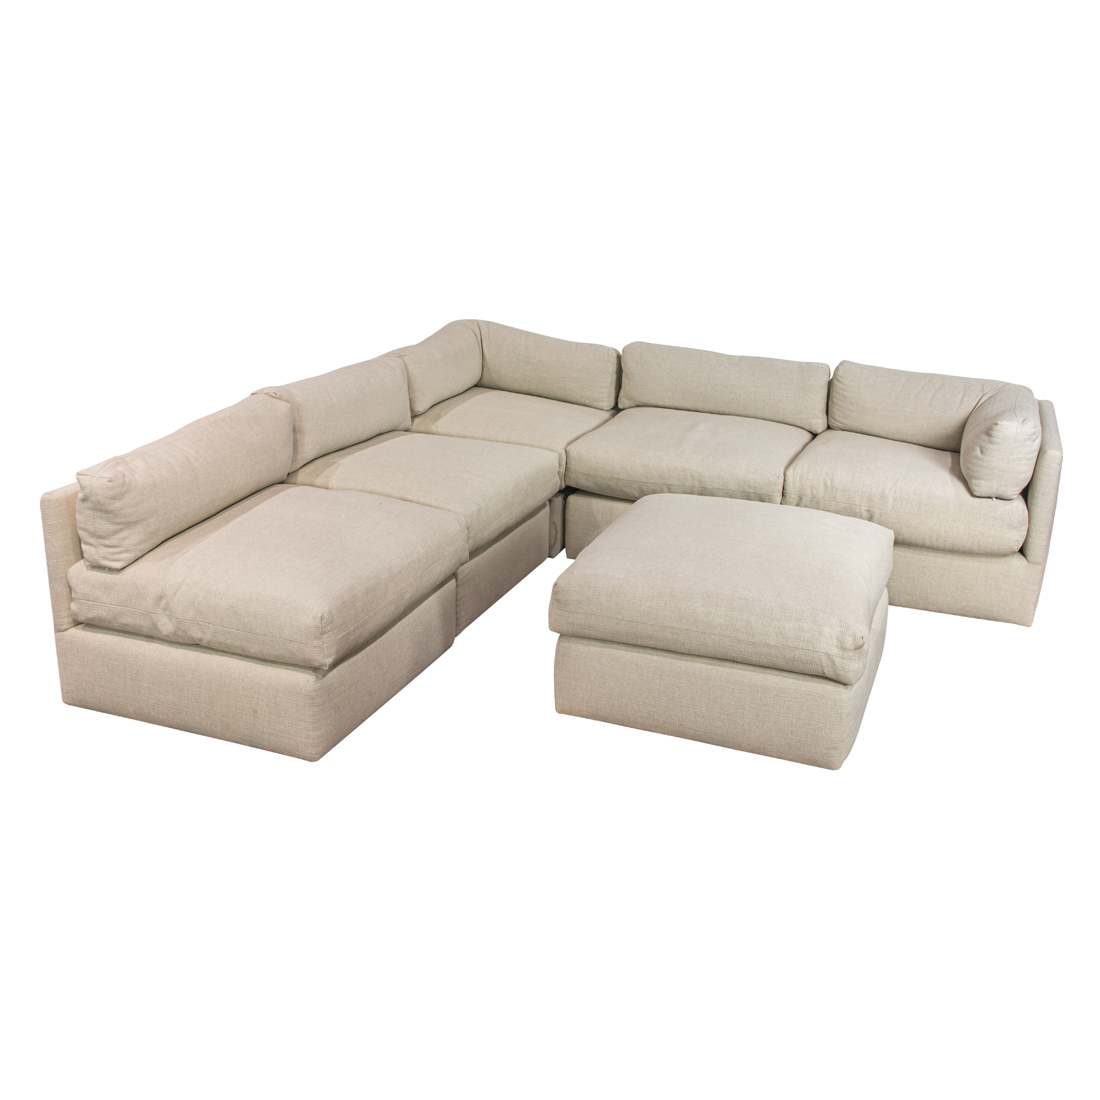 MODERN, SECTIONAL SOFA, SIX PARTS